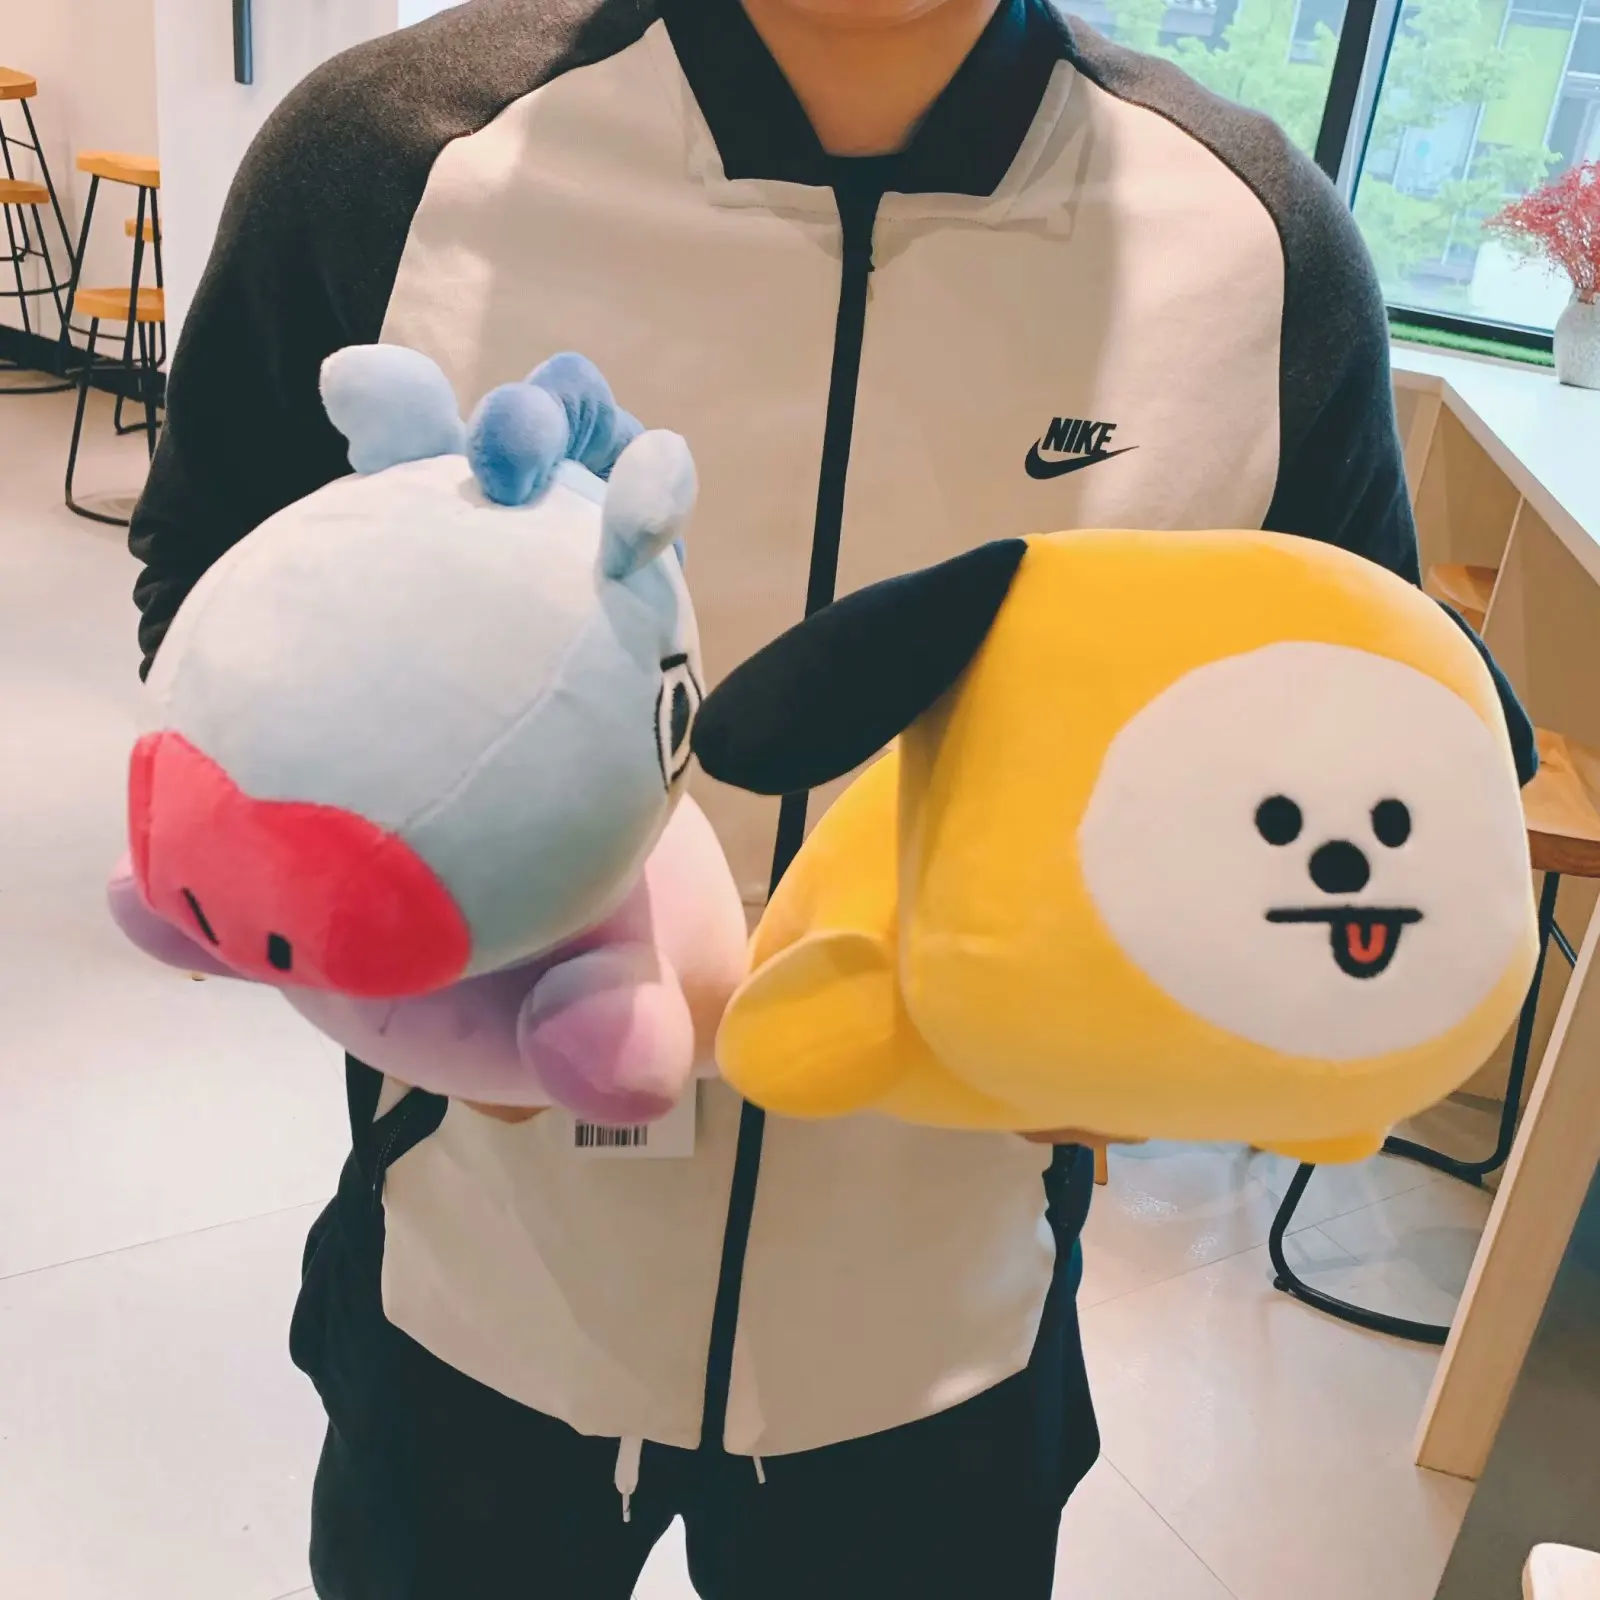 G-Ahora Cartoon Kpop BTS Soft Pillow Cover Decorative Square Throw Pillow  Case Set Cooky MANG KOYA CHIMMY TATA RJ SHOOKY Cushion Cover for Sofa Bed